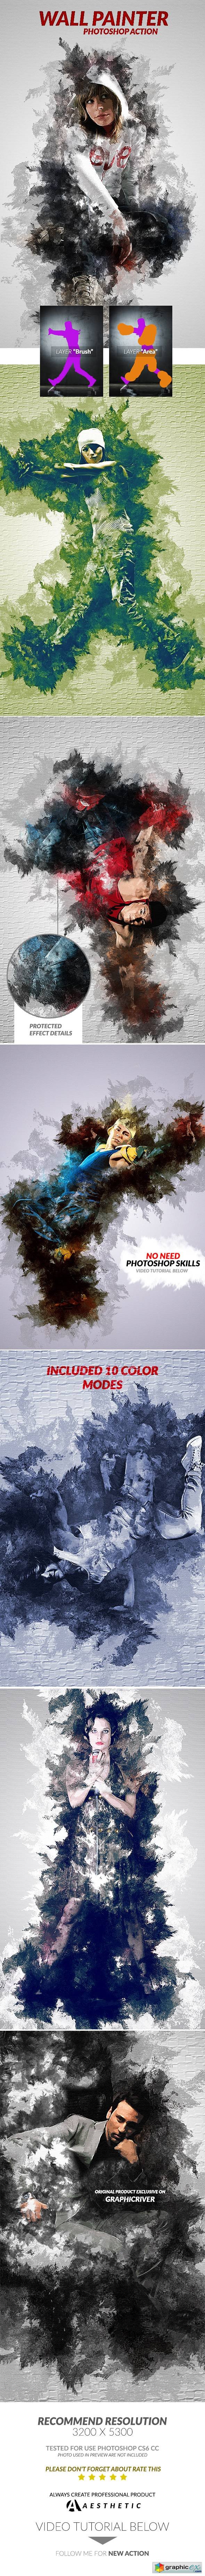 Wall Painter Photoshop Action